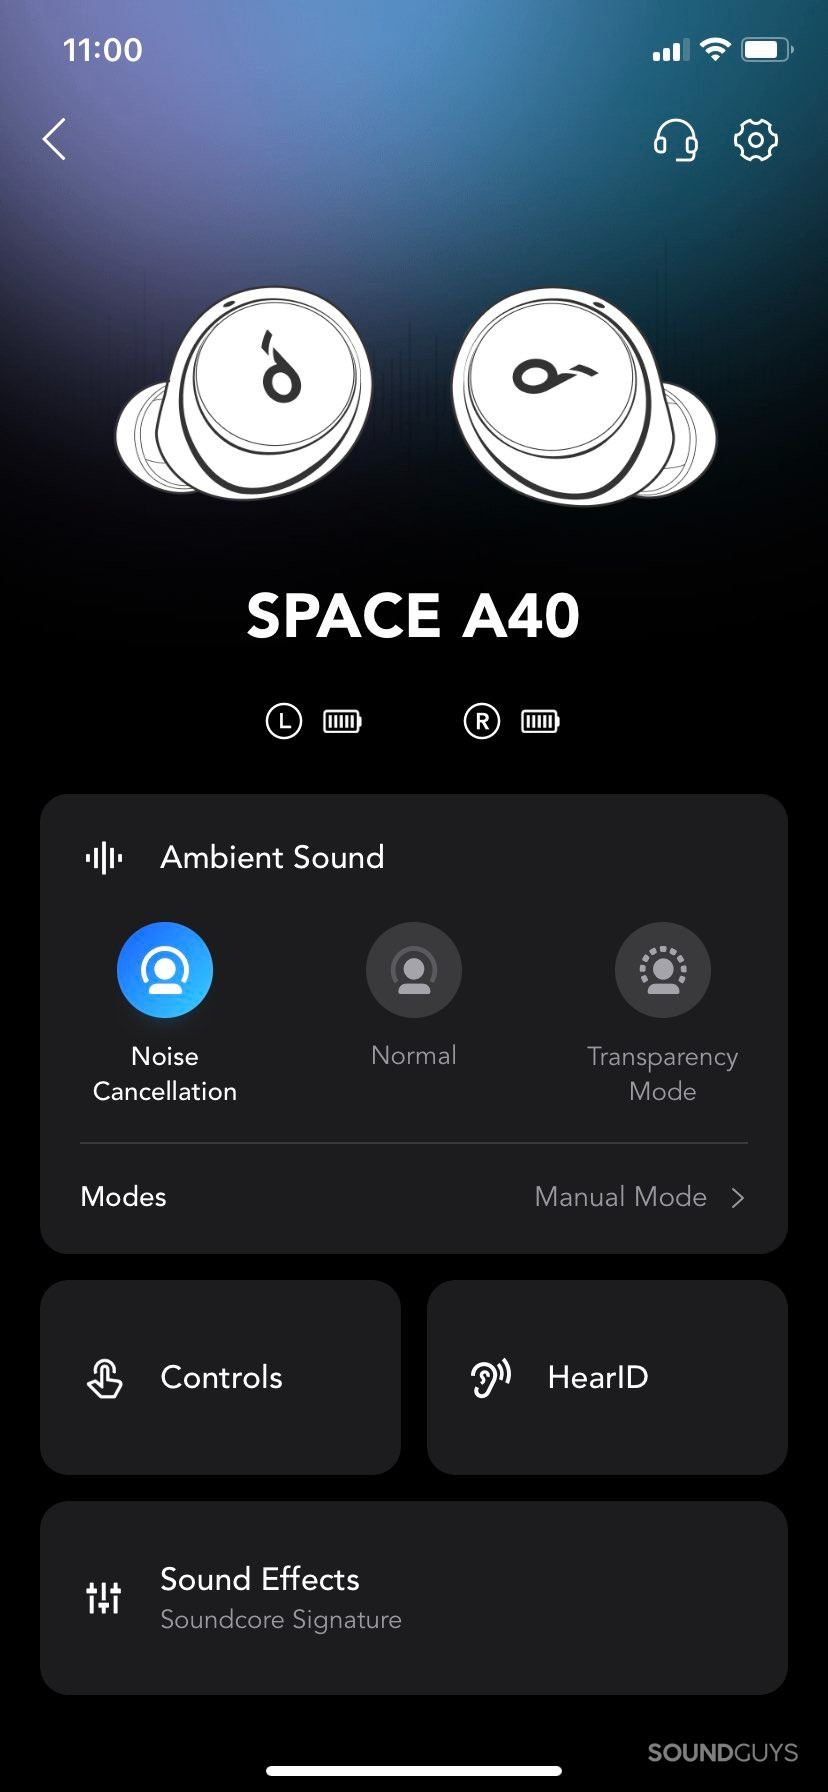 The Soundcore app, showing the screen when connected to the Space A40. There are options for noise control and sound profiles.